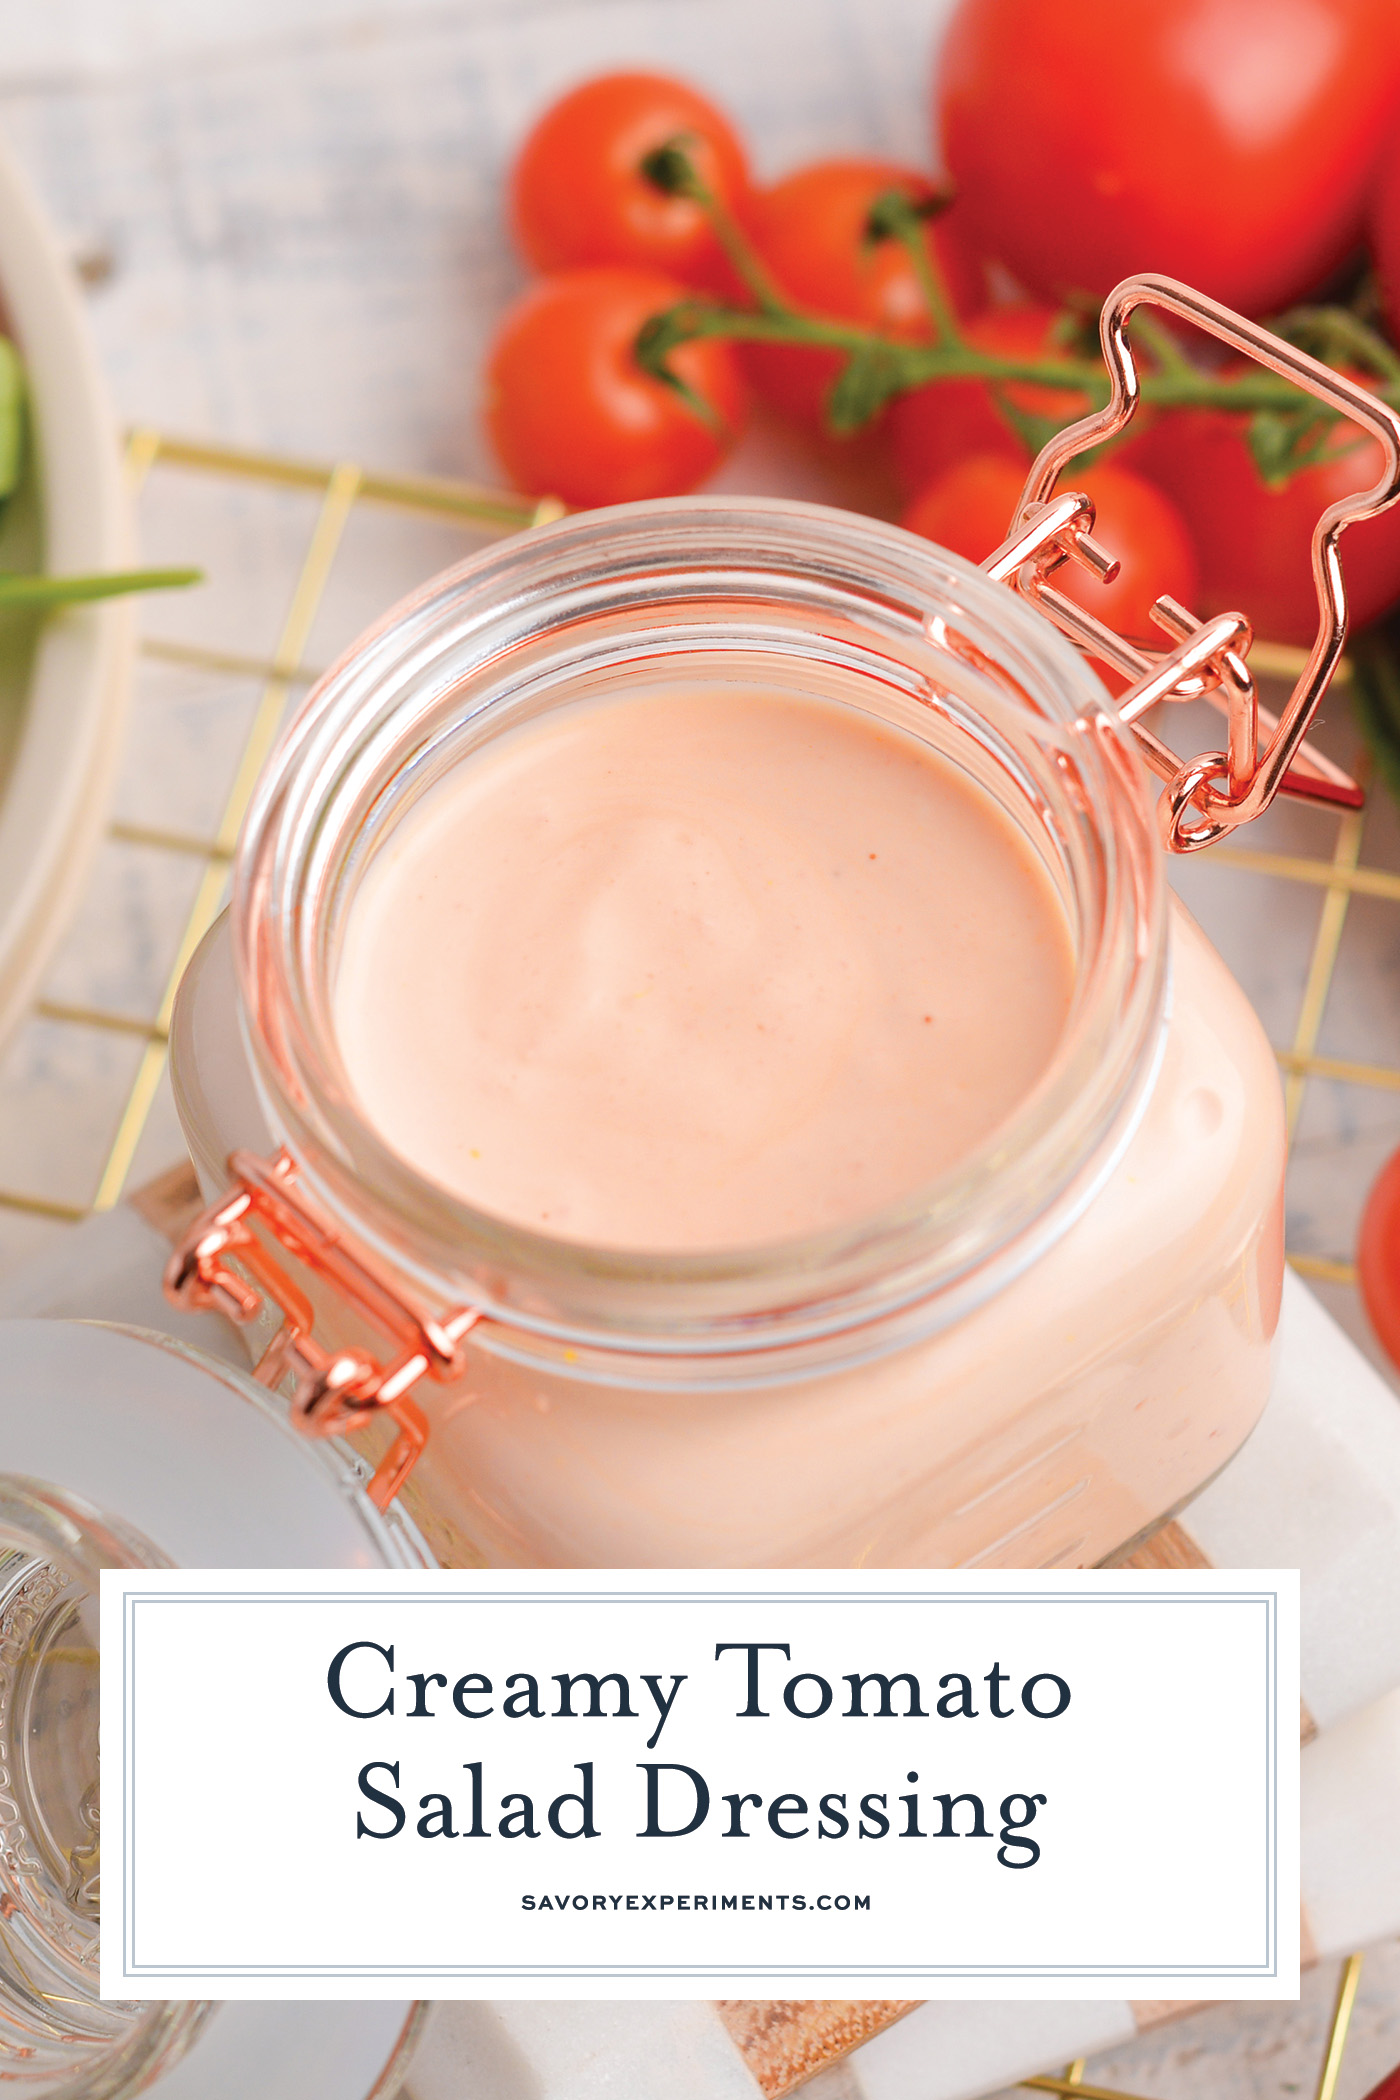 angled shot of jar of creamy tomato salad dressing with text overlay